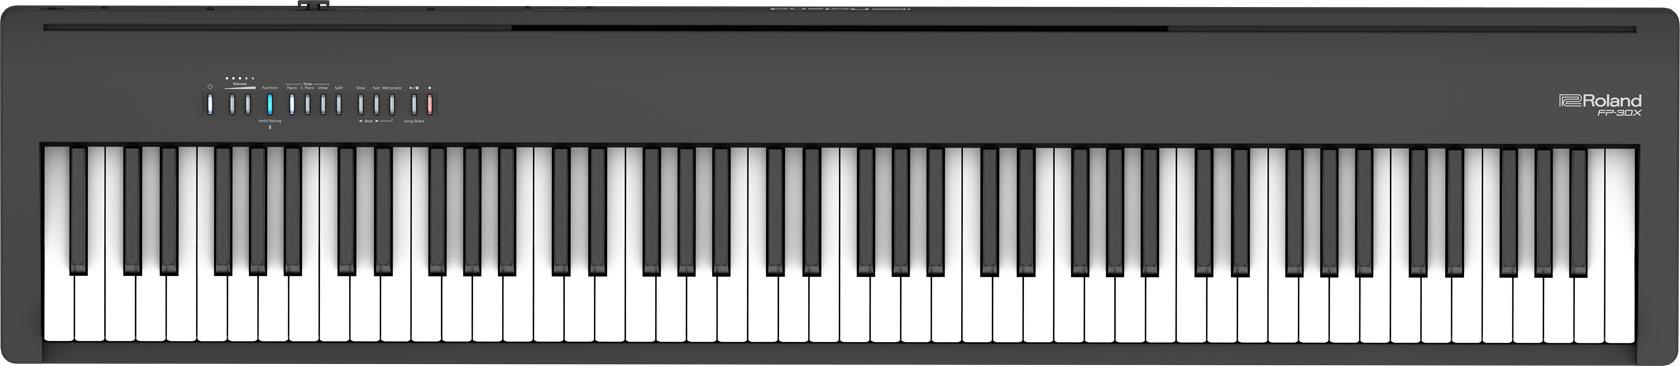 FP-30X-BK Stage-Piano